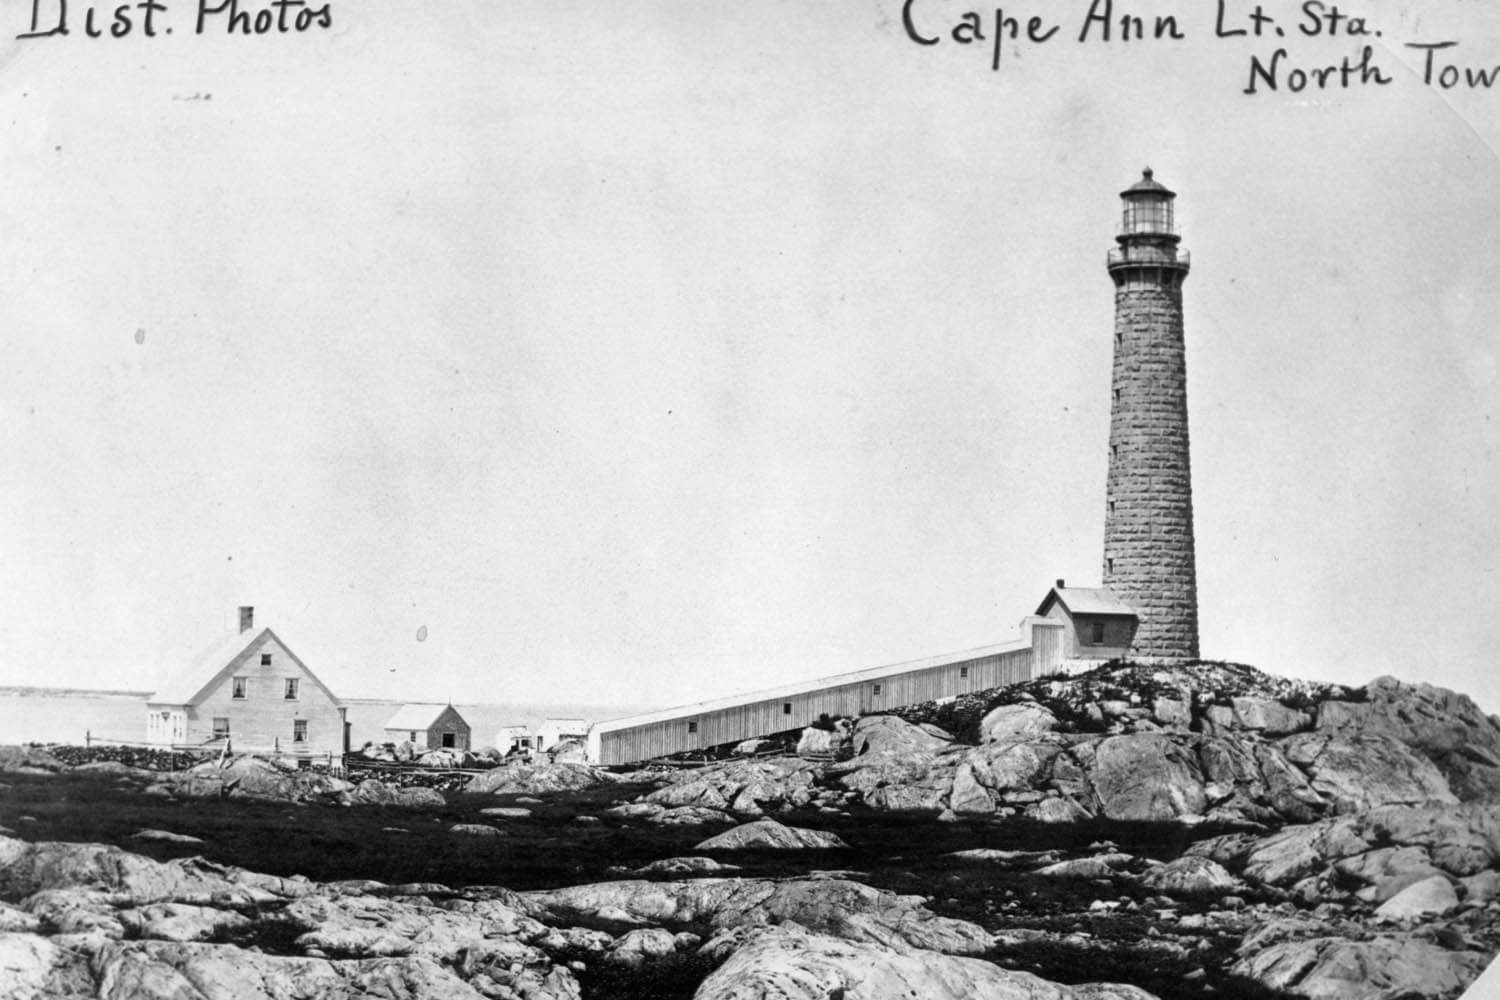 A black and white photo of the cape ann lighthouse.